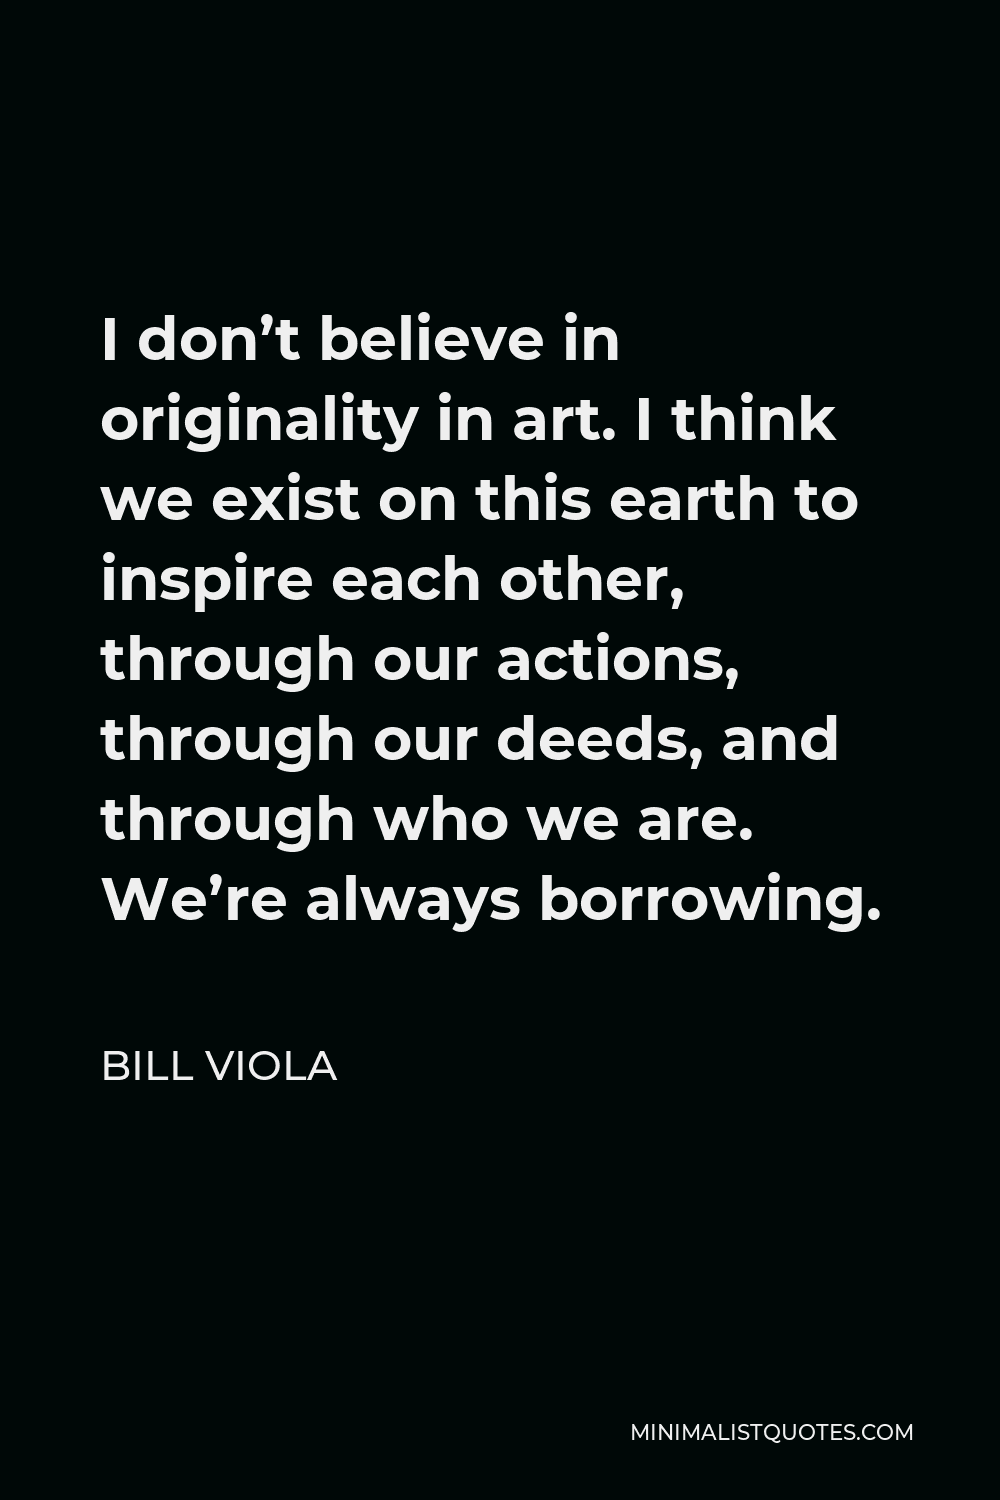 Bill Viola Quote - I don’t believe in originality in art. I think we exist on this earth to inspire each other, through our actions, through our deeds, and through who we are. We’re always borrowing.